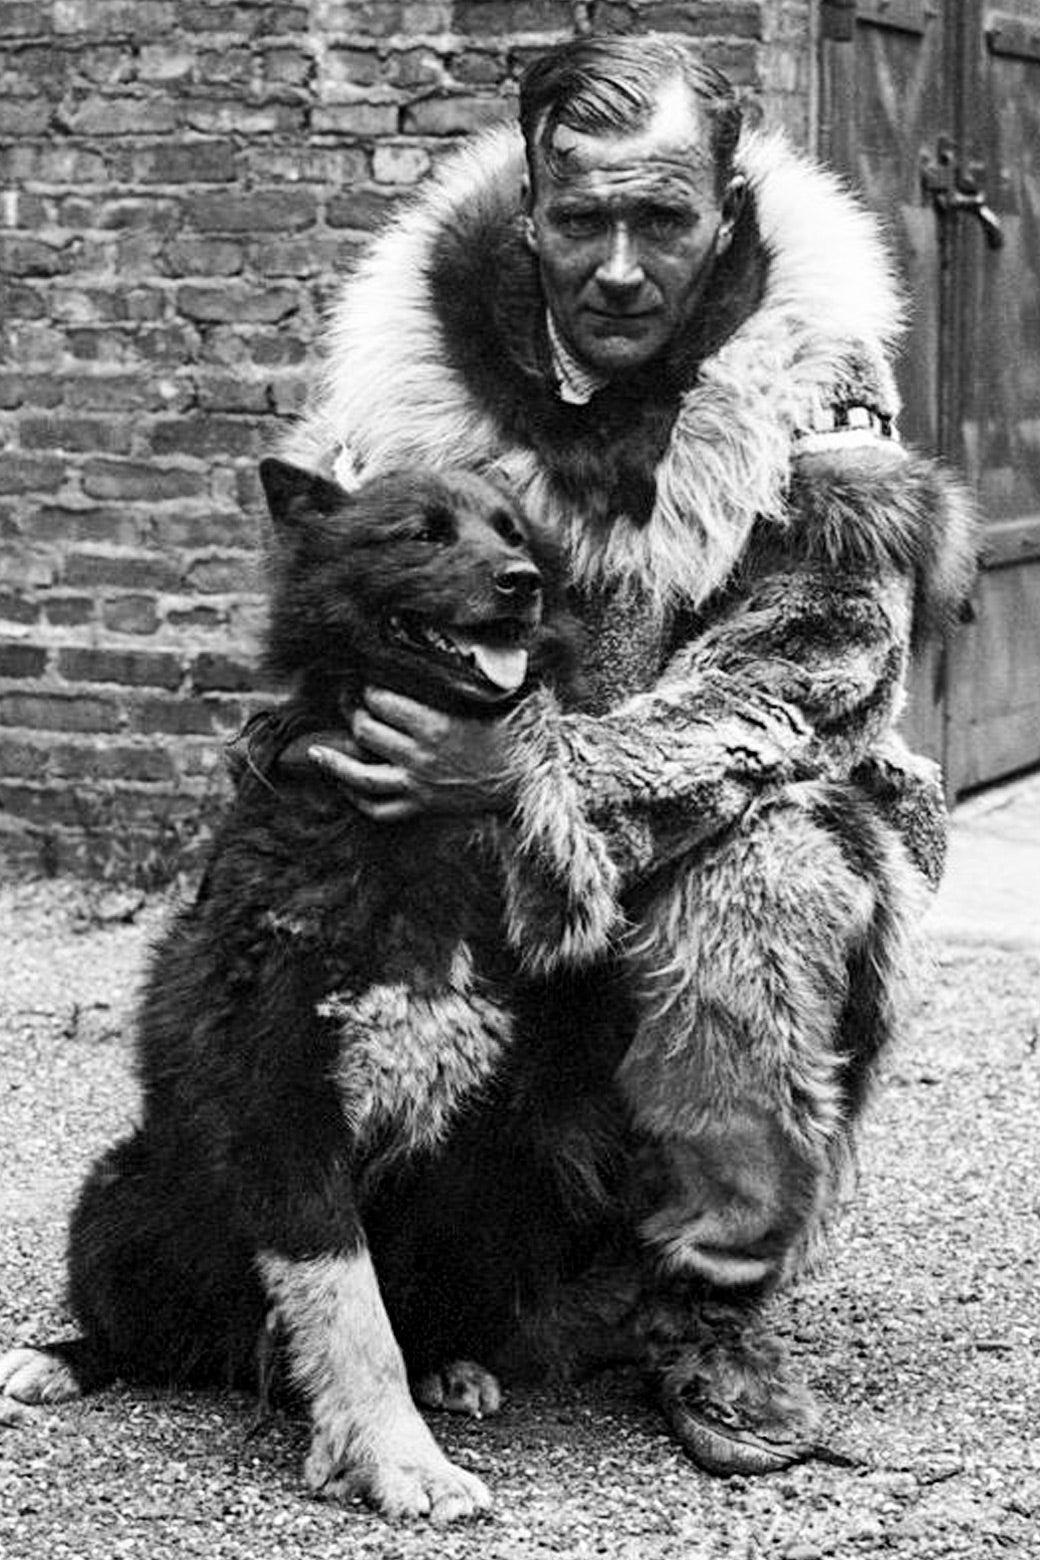 A man in a large fur jacket crouches next to a black and white dog.